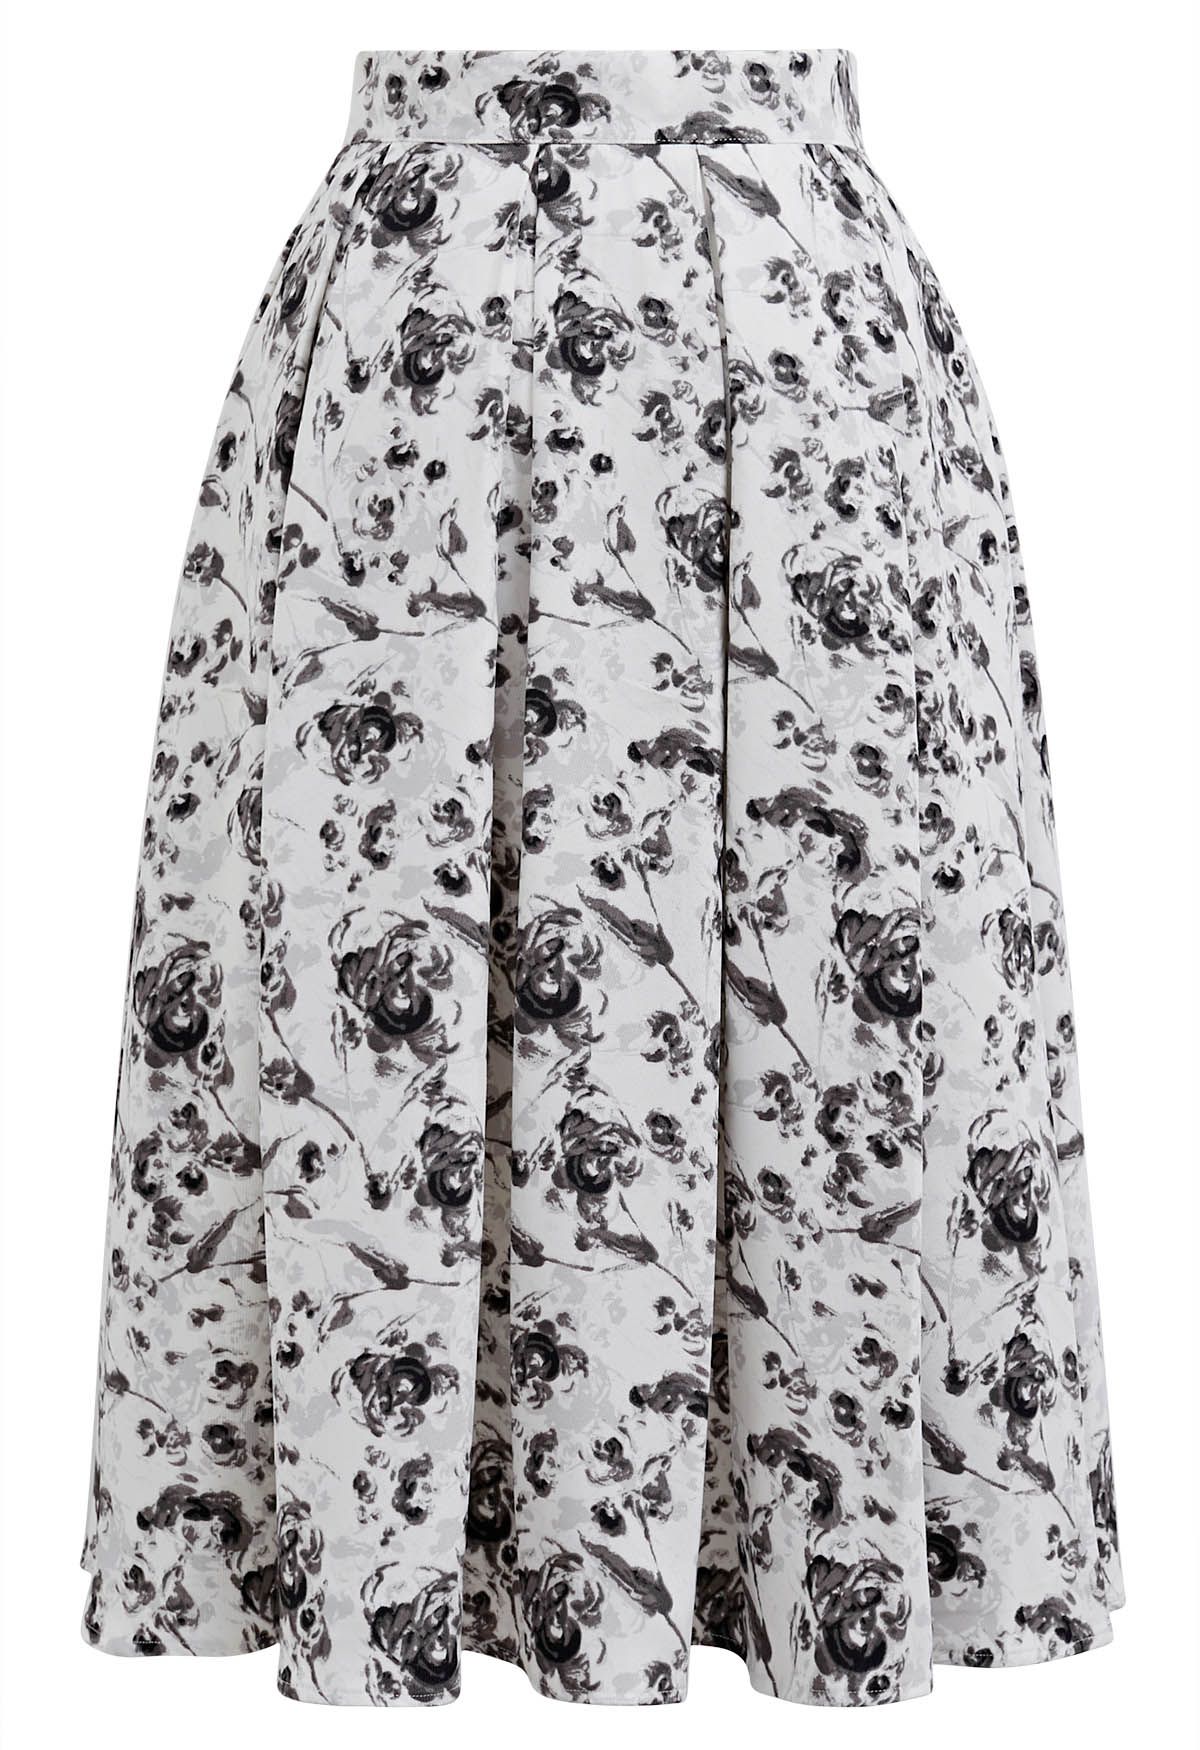 Inky Floral Pleated A-Line Skirt